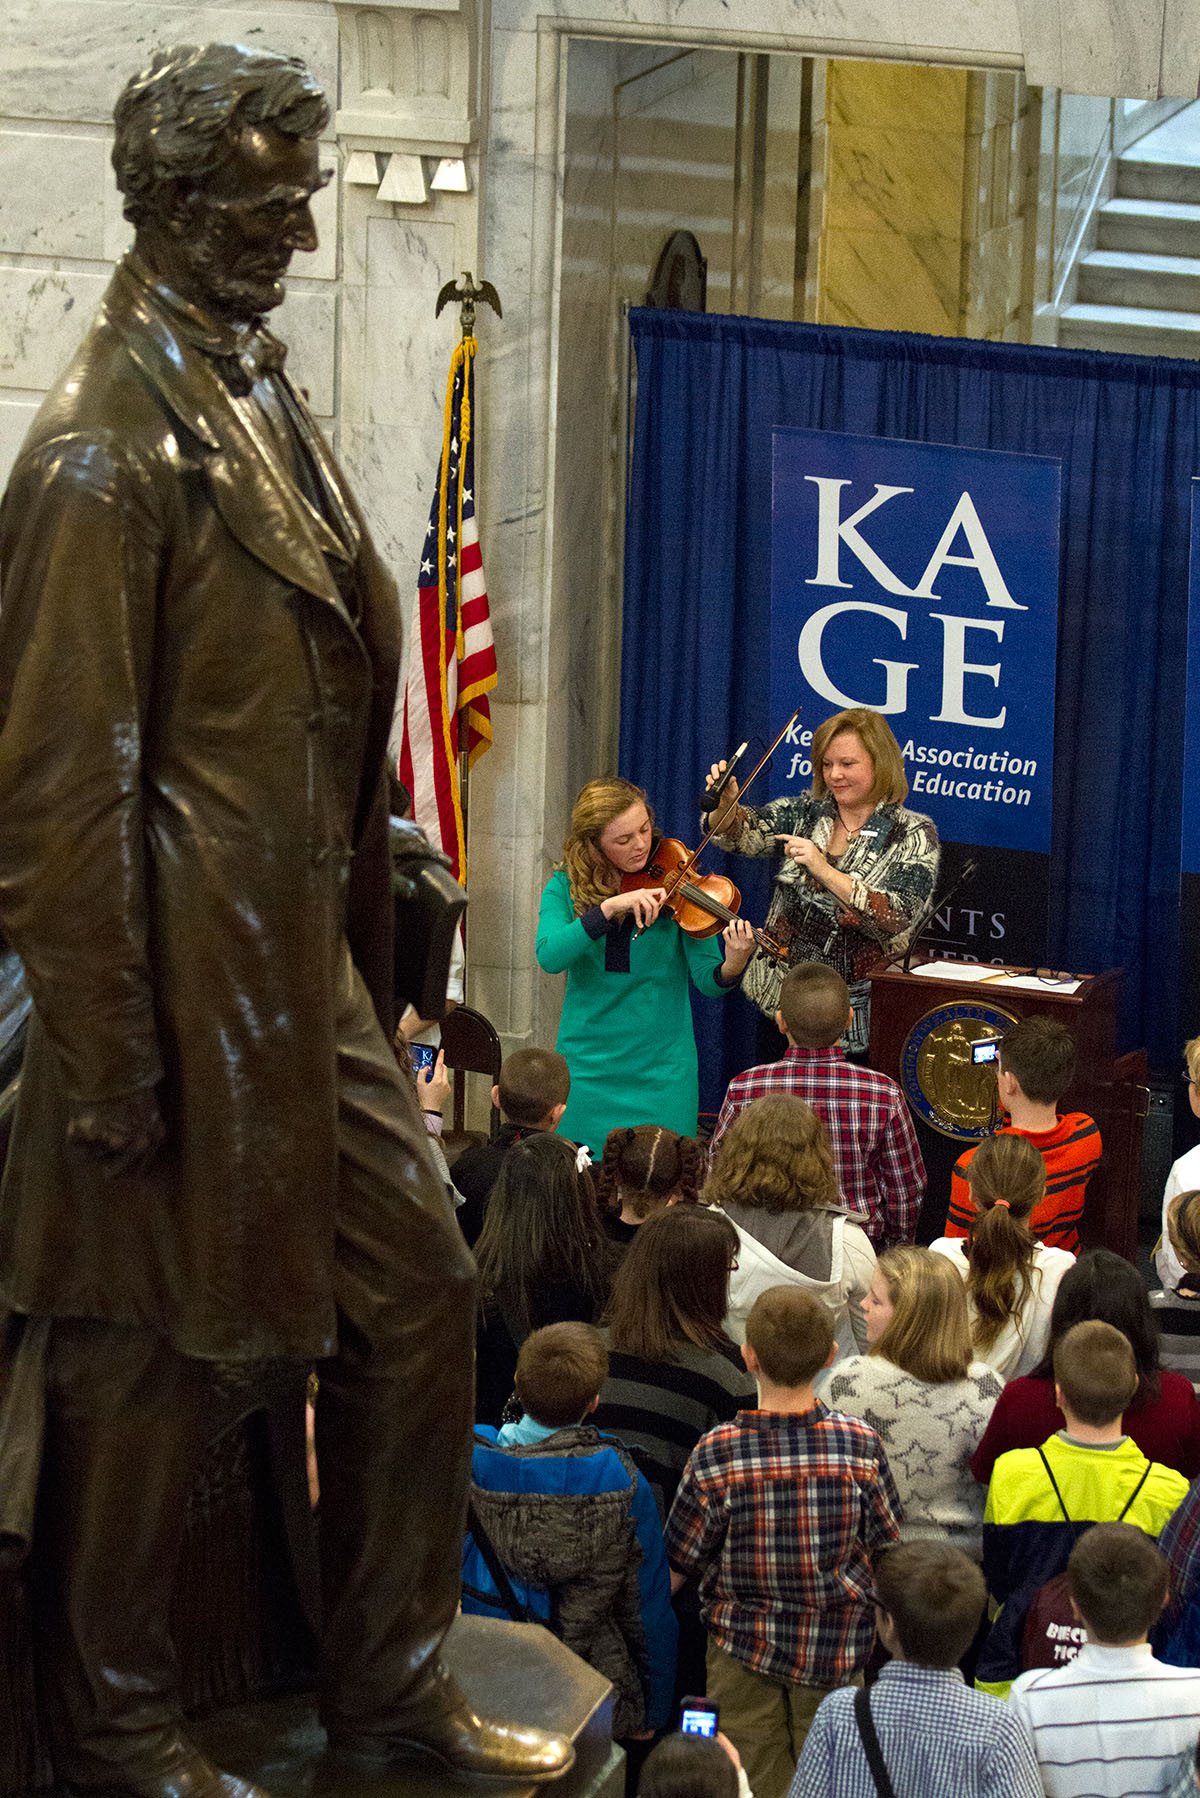 Katherine Goble, the 2010 KAGE Distinguished Student, plays "My Old Kentucky Home" during the ceremony.